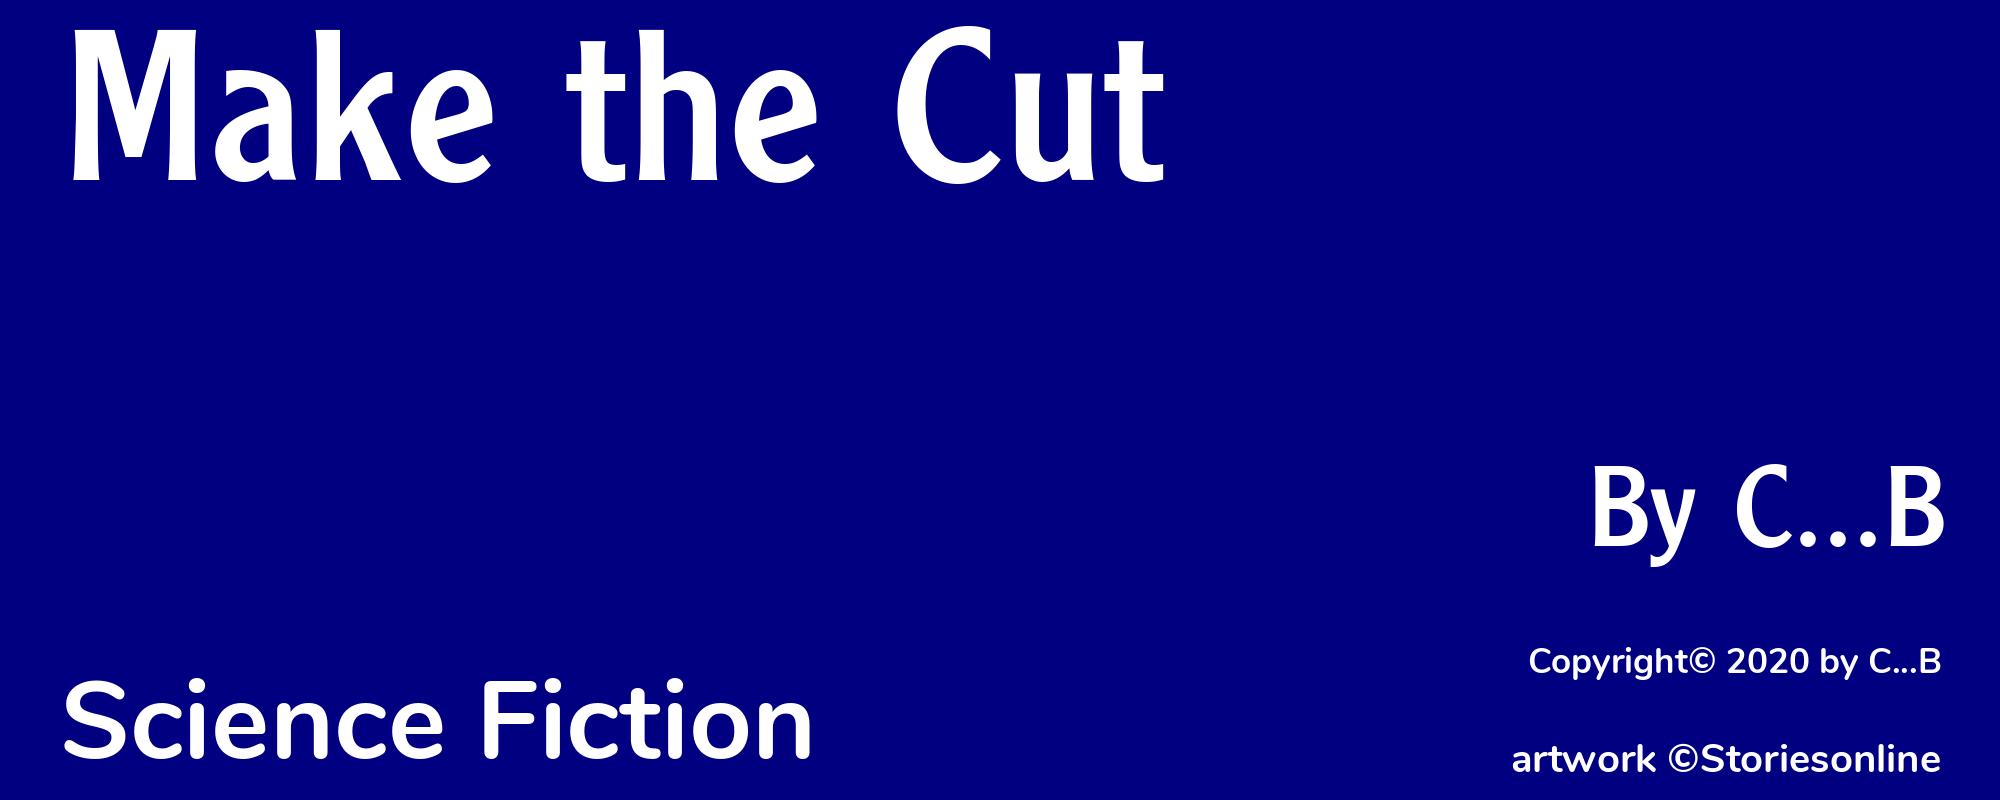 Make the Cut - Cover